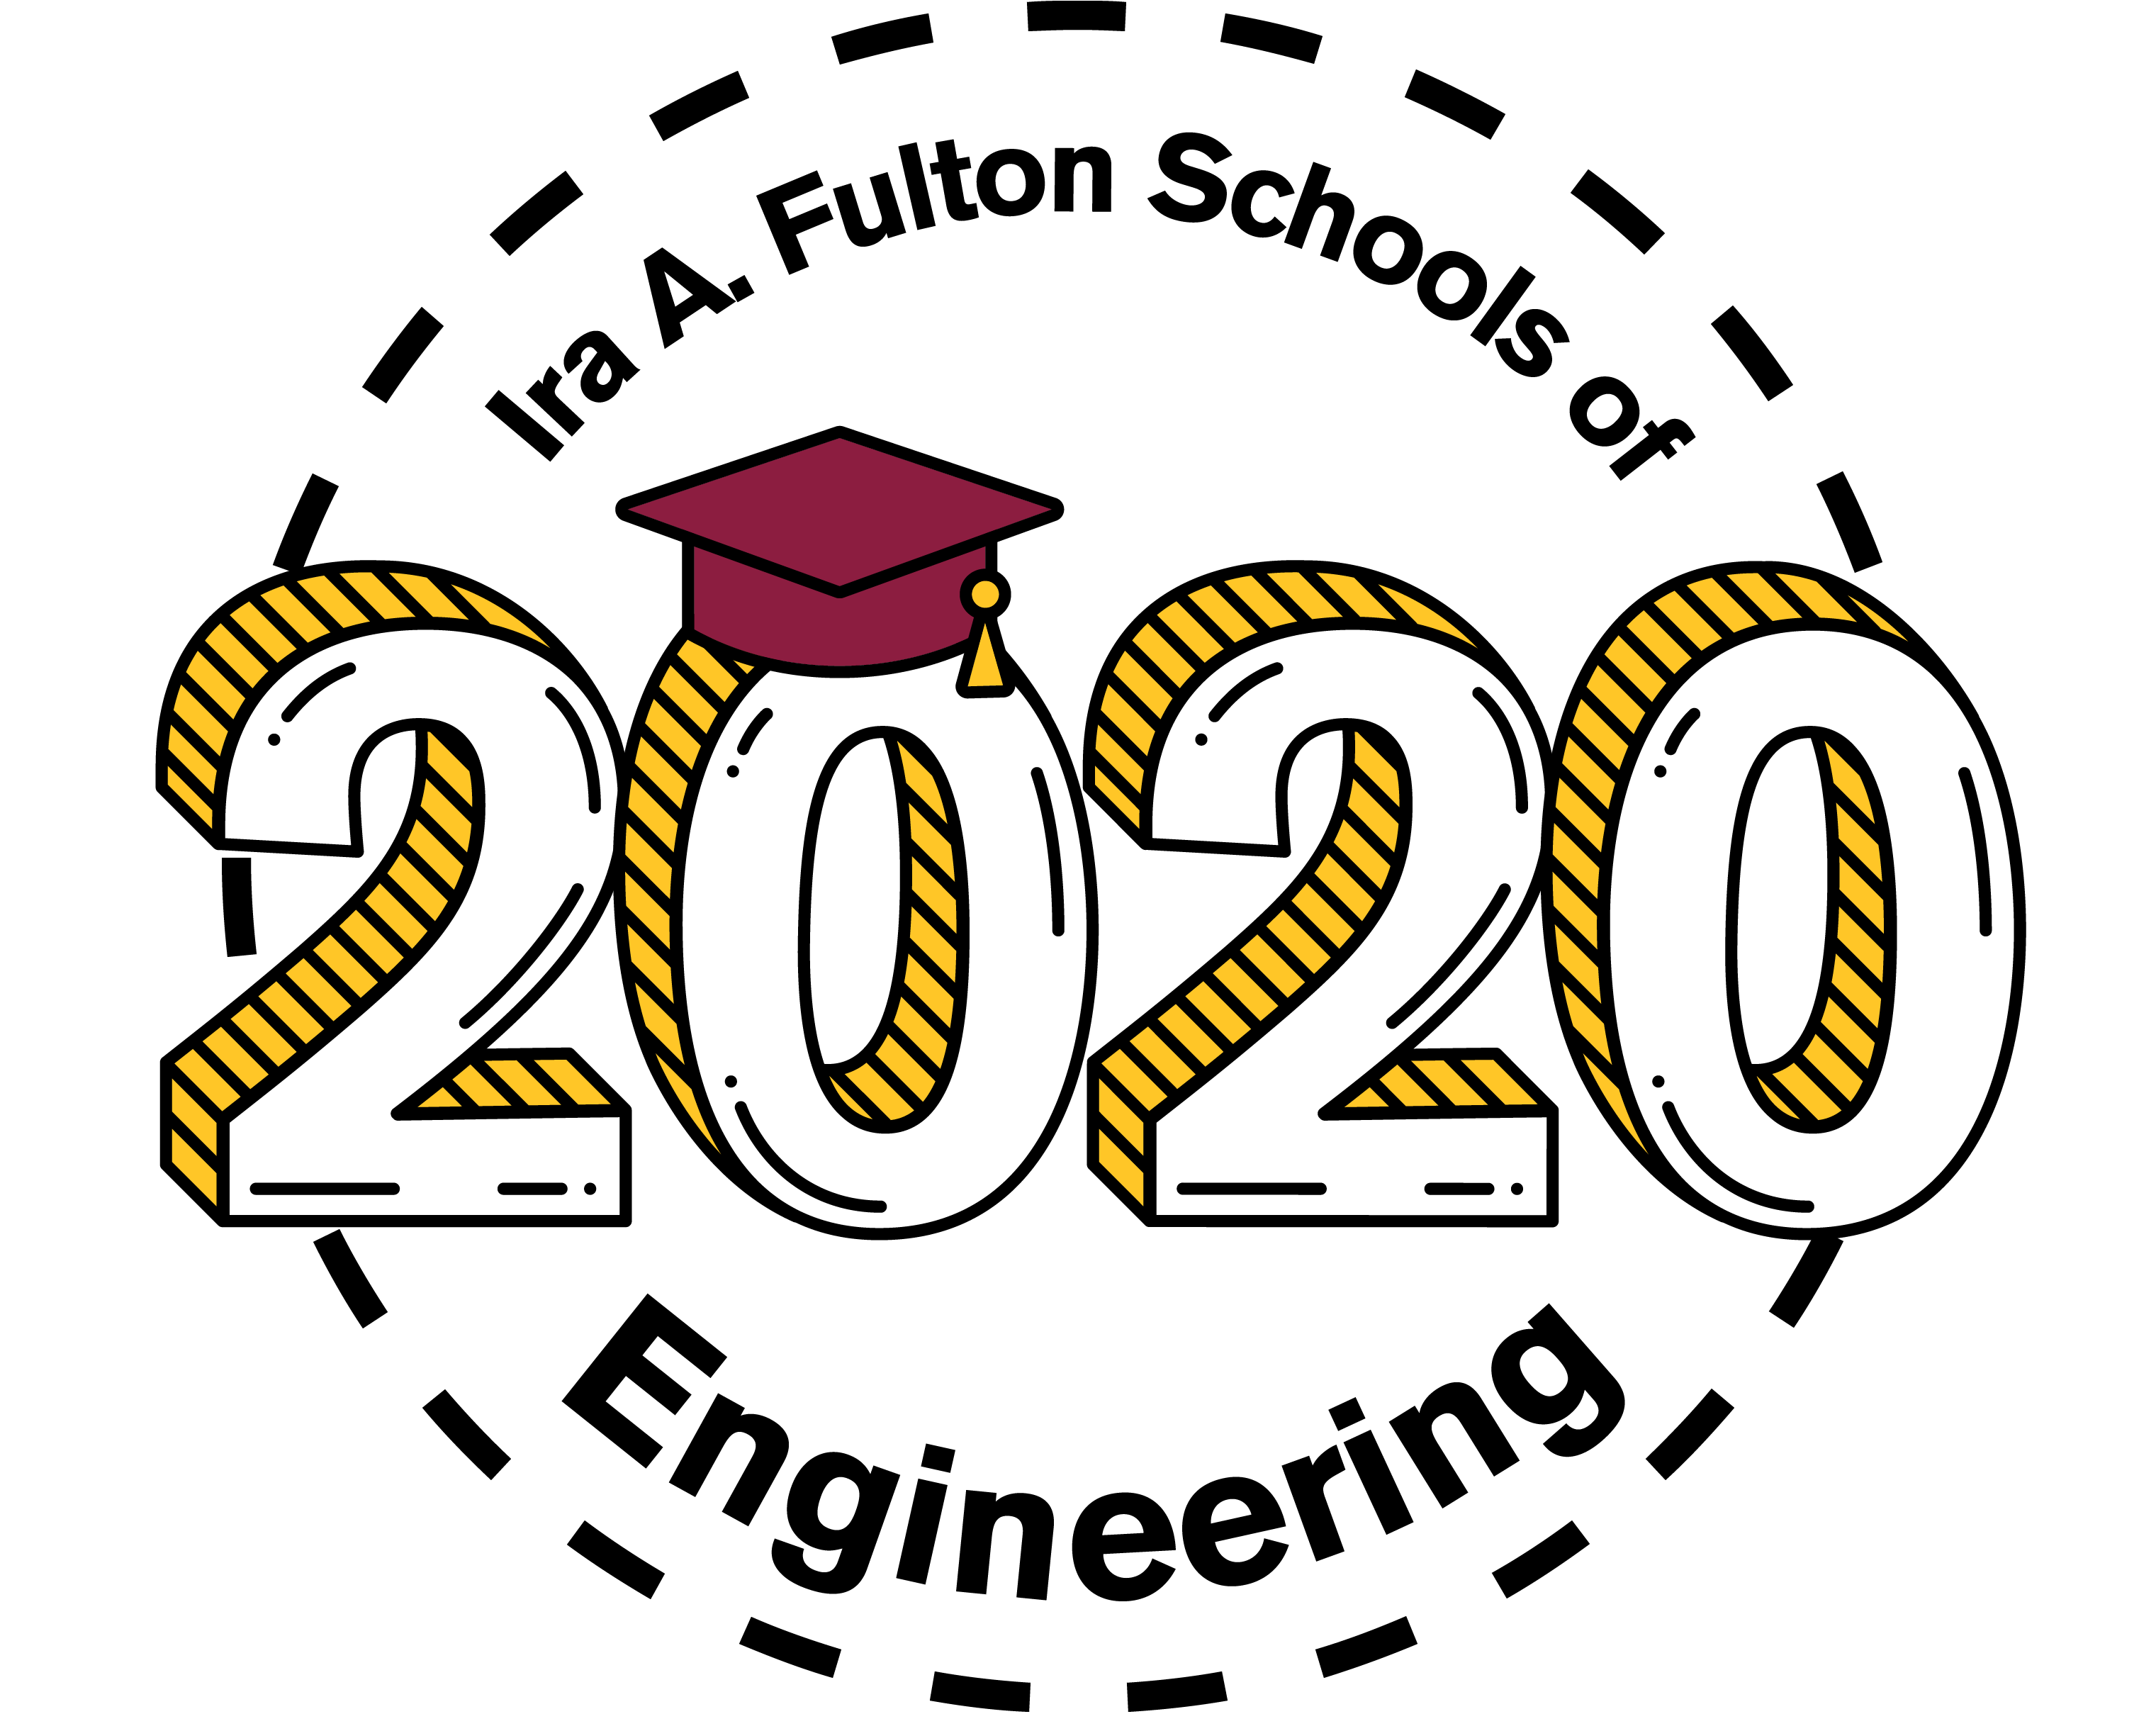 Transparent PNG Fulton Schools Grad Stamp with "Ira A. Fulton Schools of Engineering 2020"